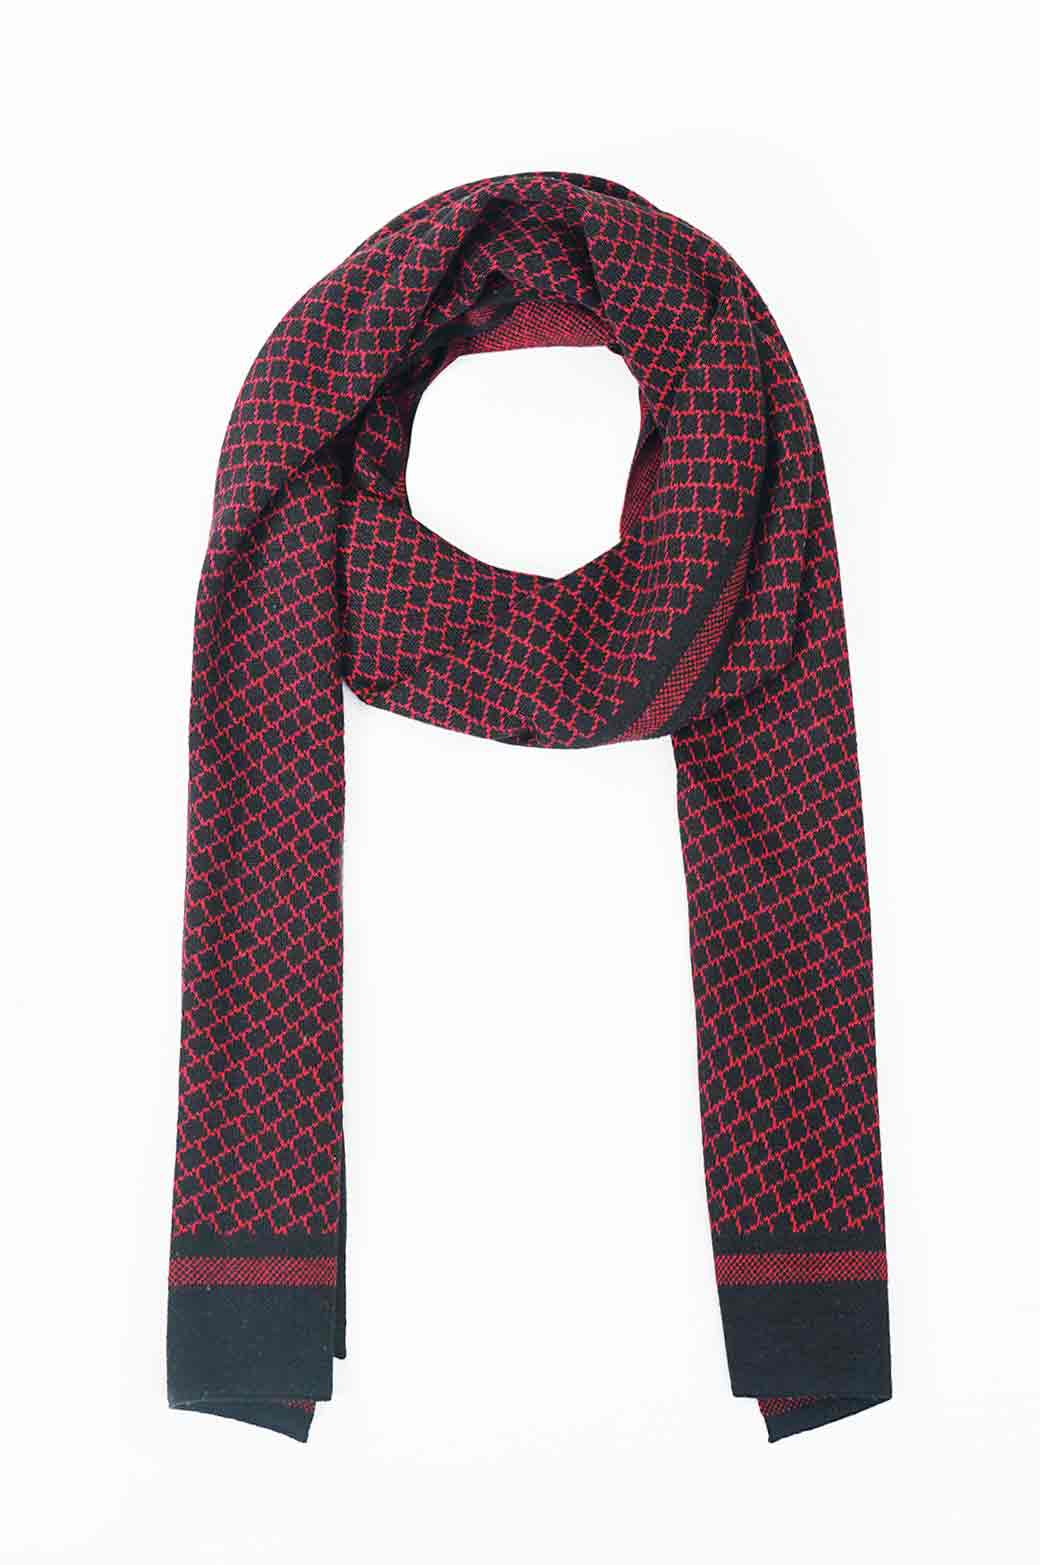 MAROON WOVEN PATTERNED SCARF